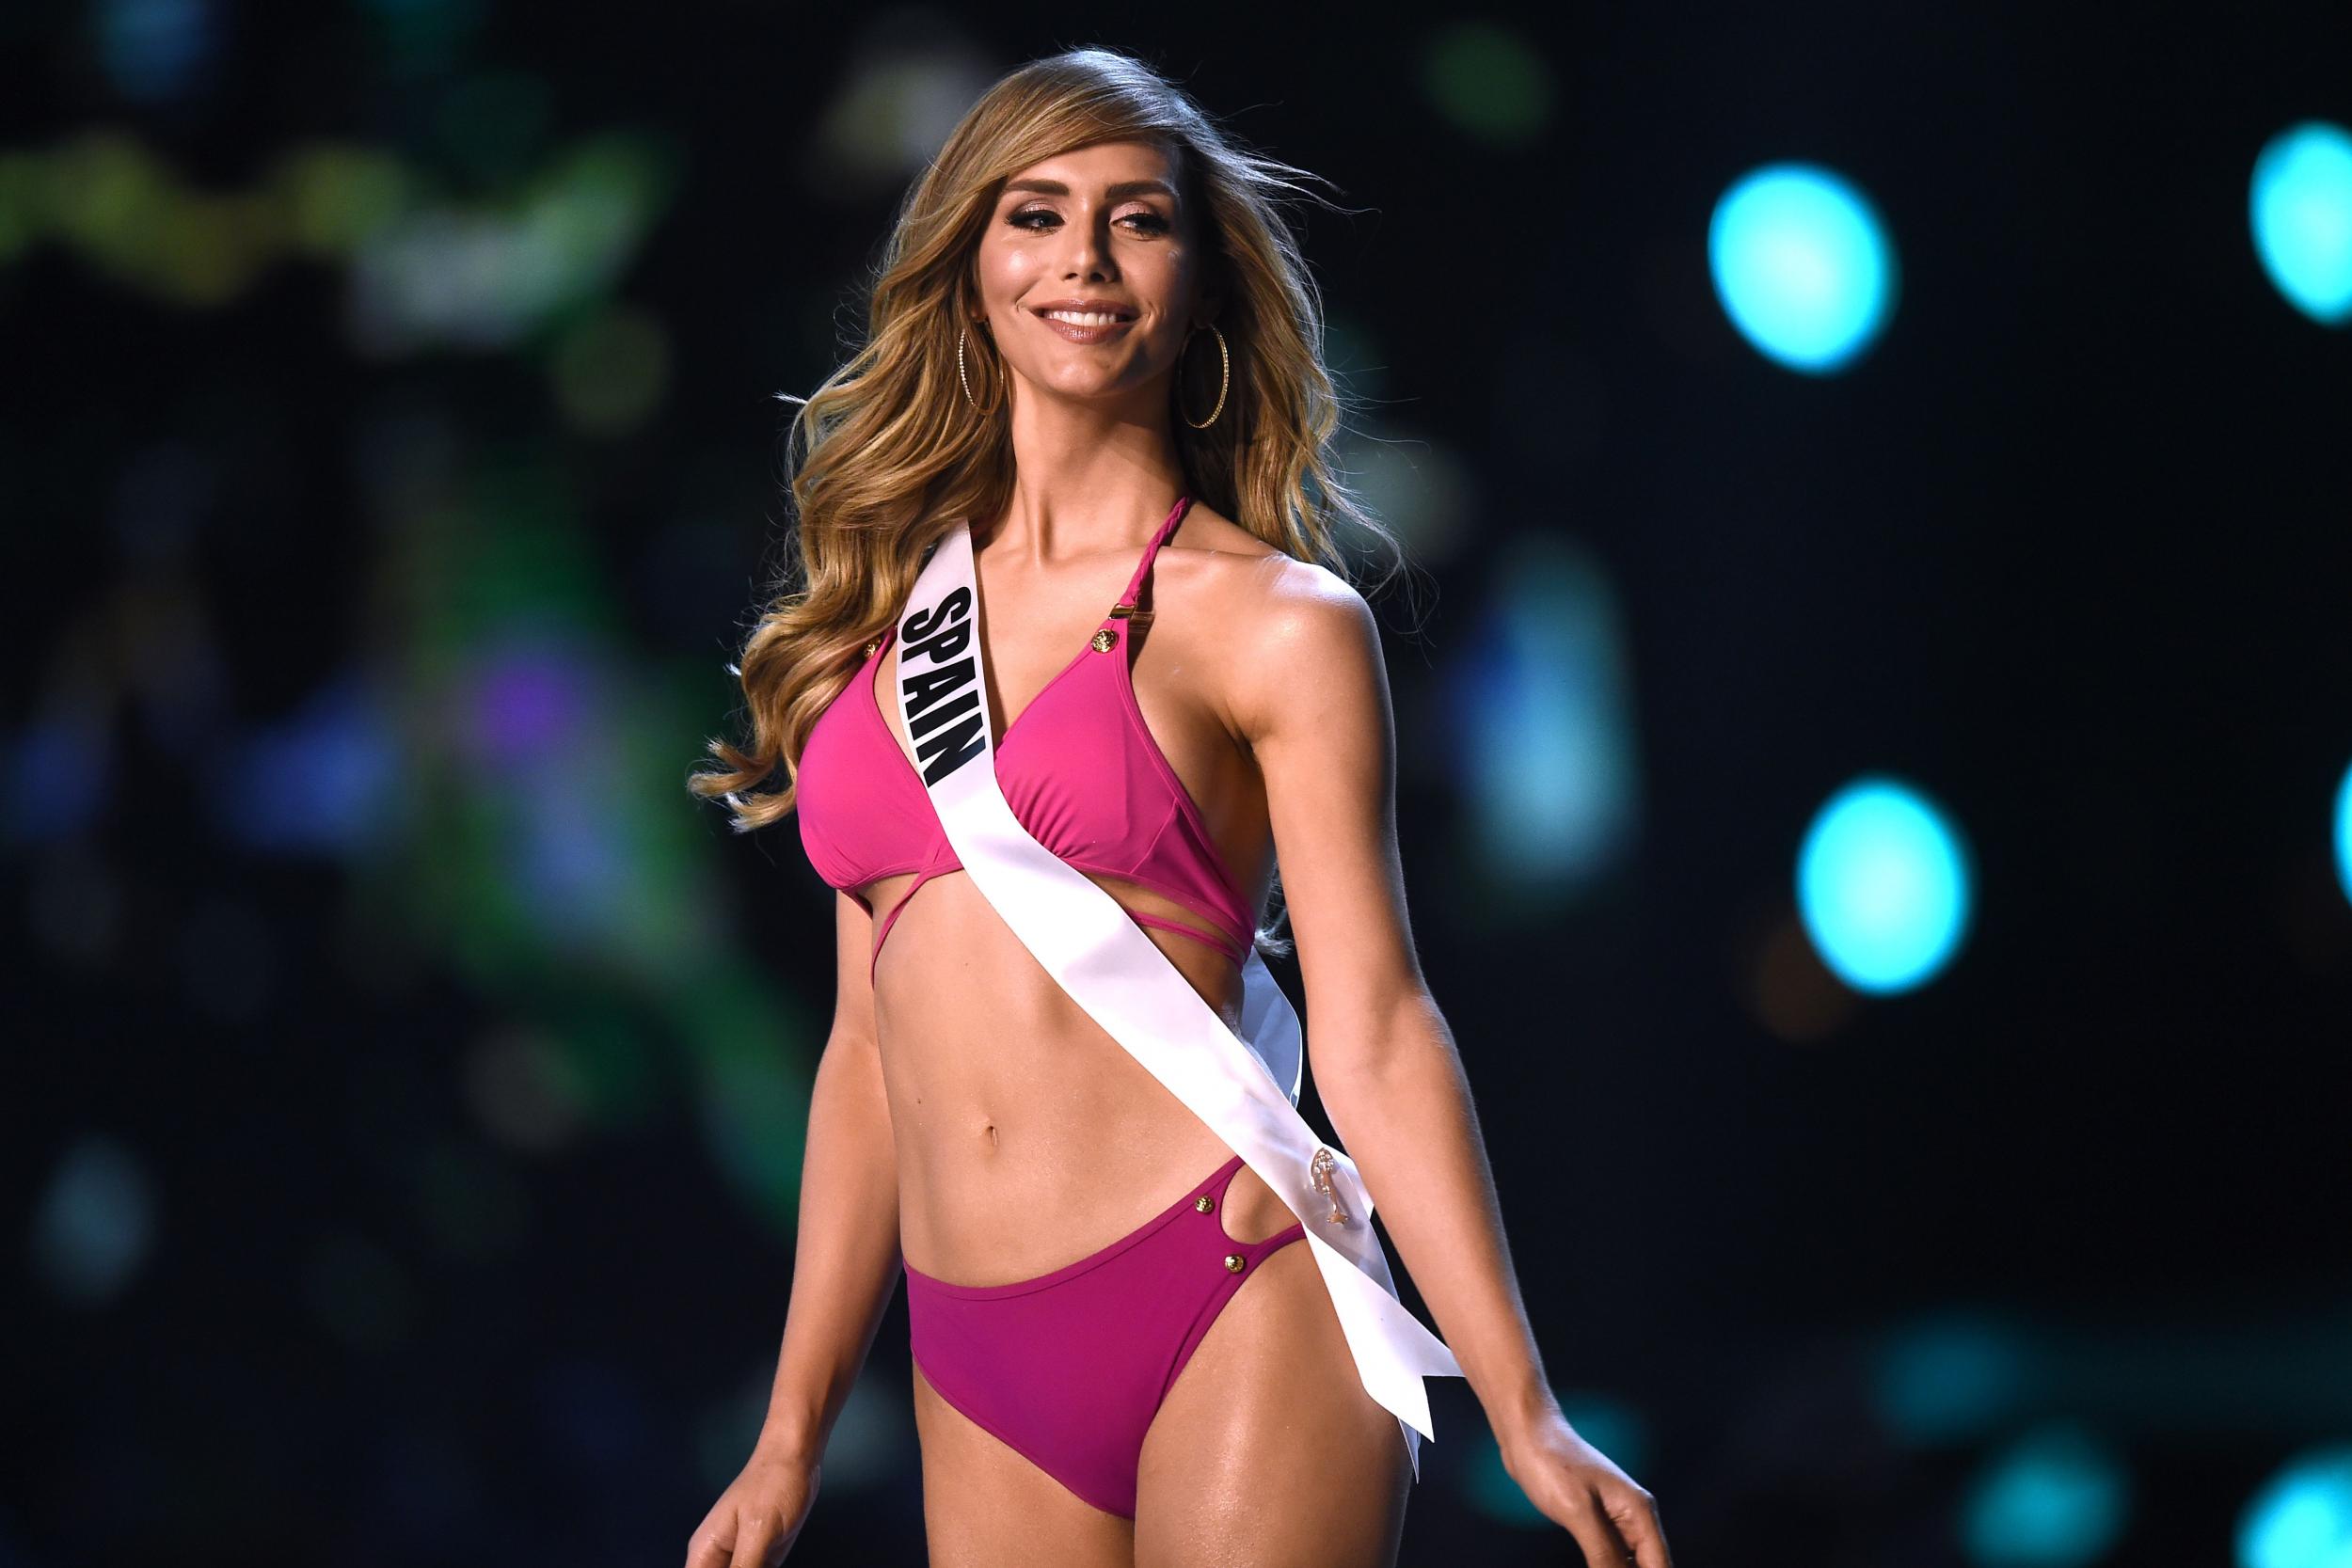 Angela Ponce representing Spain in Miss Universe 2018